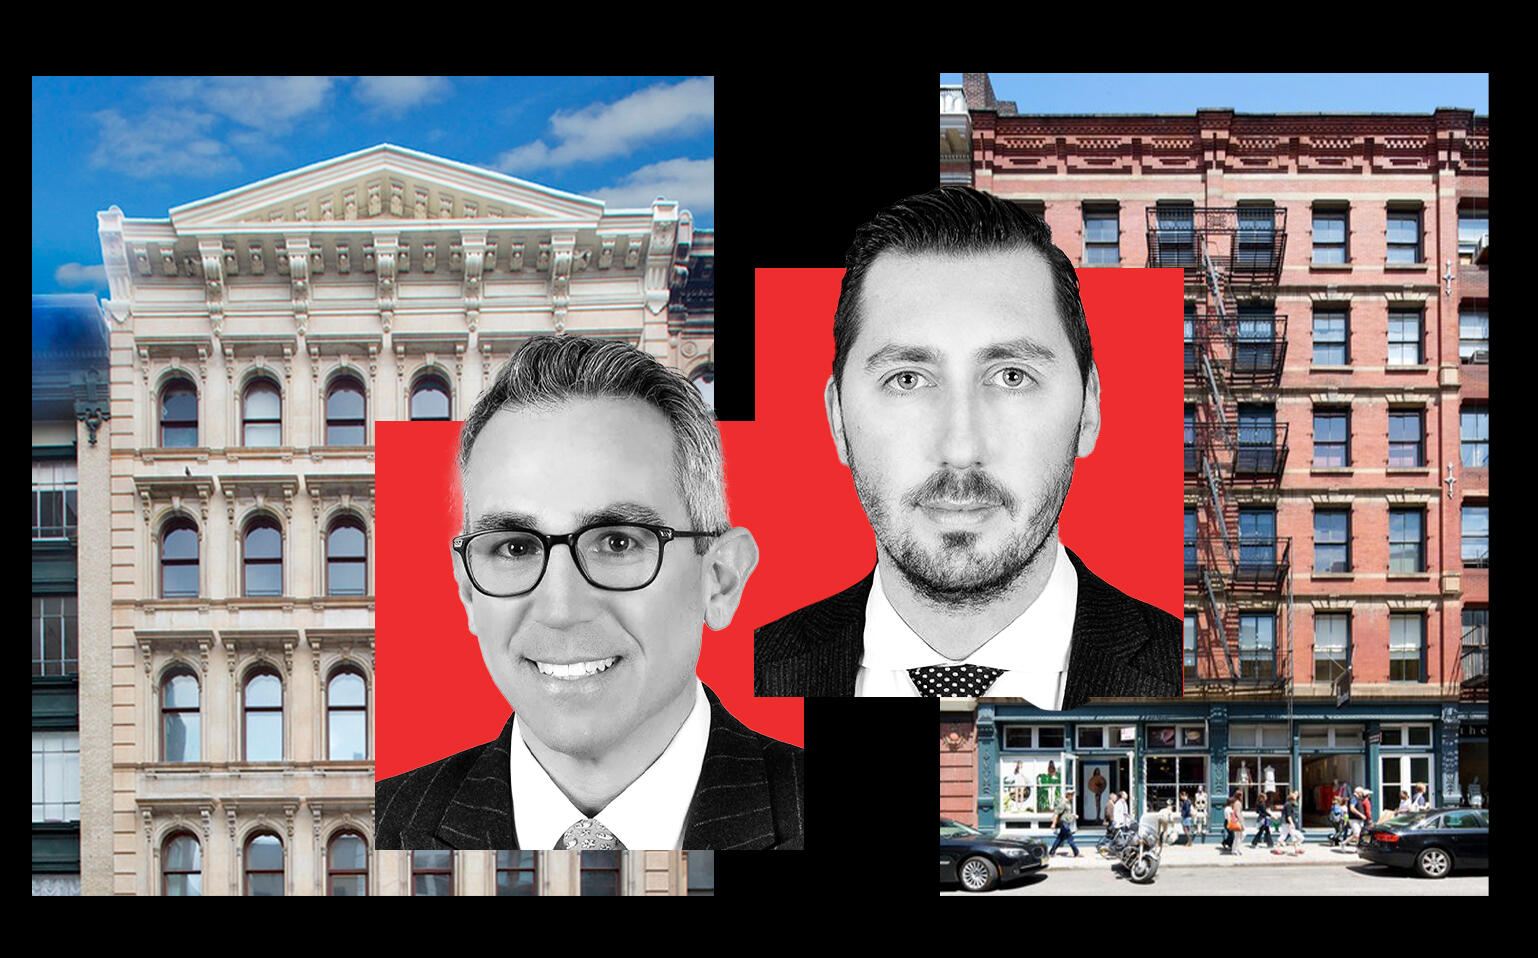 478-482 Broadway and 155 Spring Street with KPG Funds founders Gregory Kraut and Rod Kritsberg (VNO, KPG)